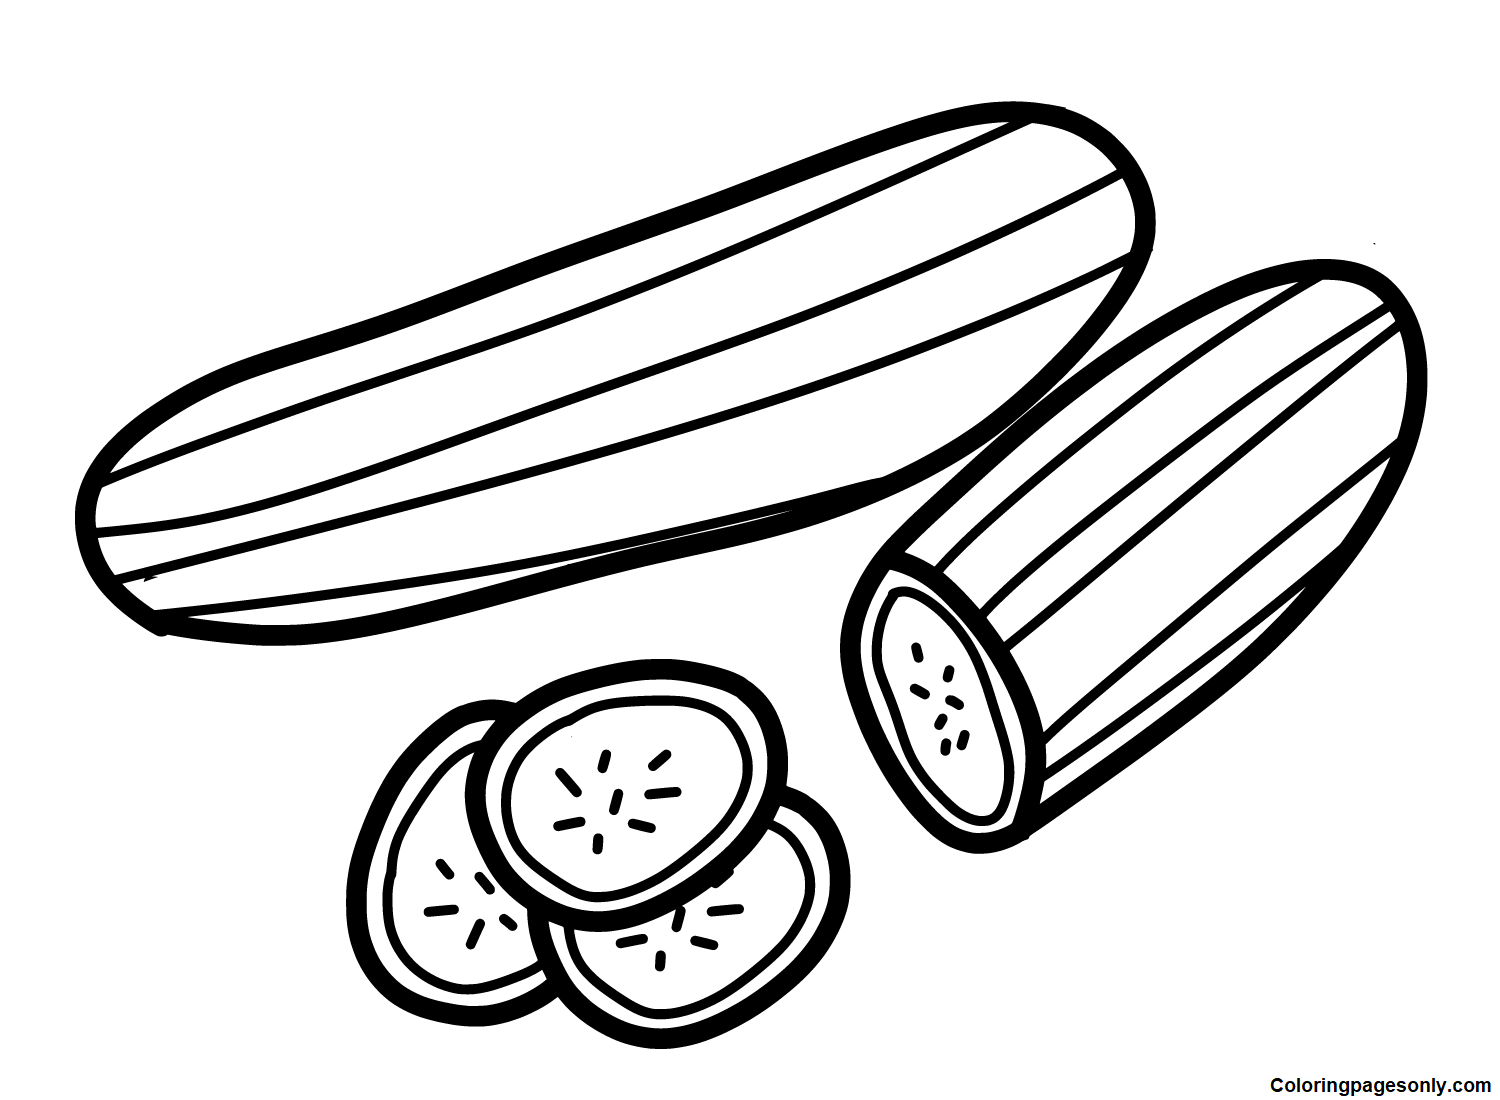 Free Printable Cucumber Coloring Pages